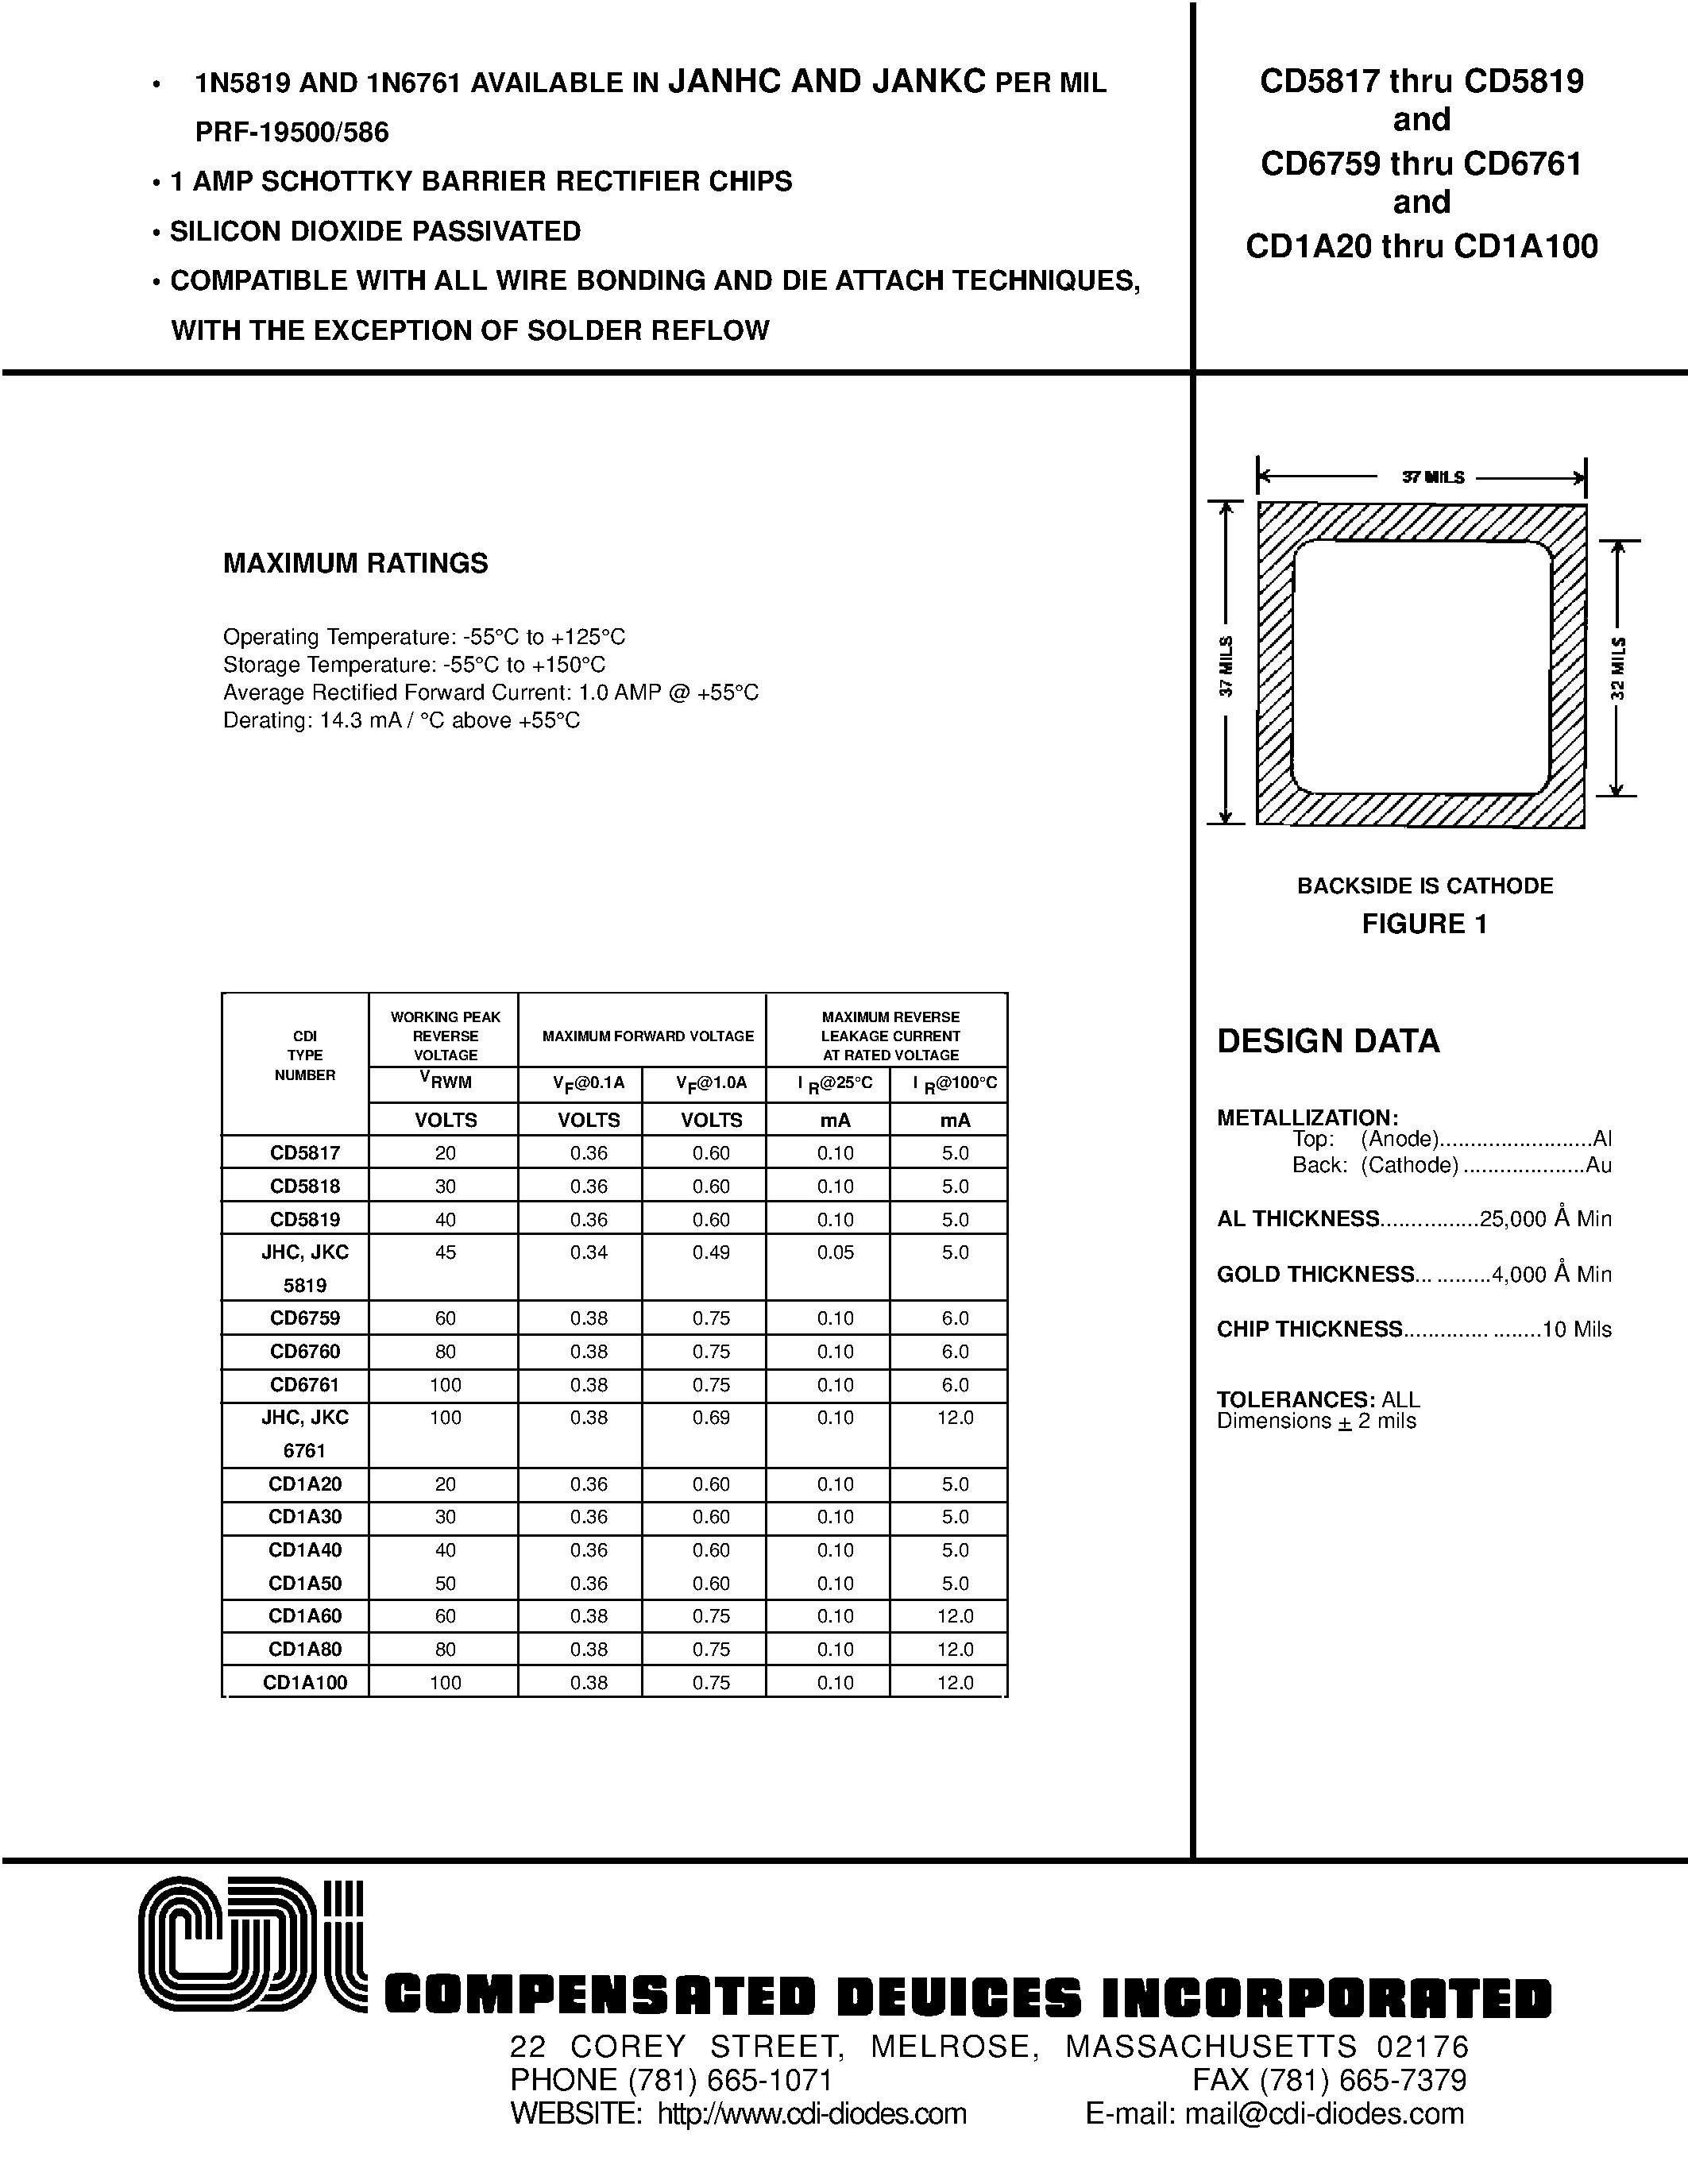 Datasheet CD1A20 - 1 AMP SCHOTTKY BARRIER RECTIFIER CHIPS page 1